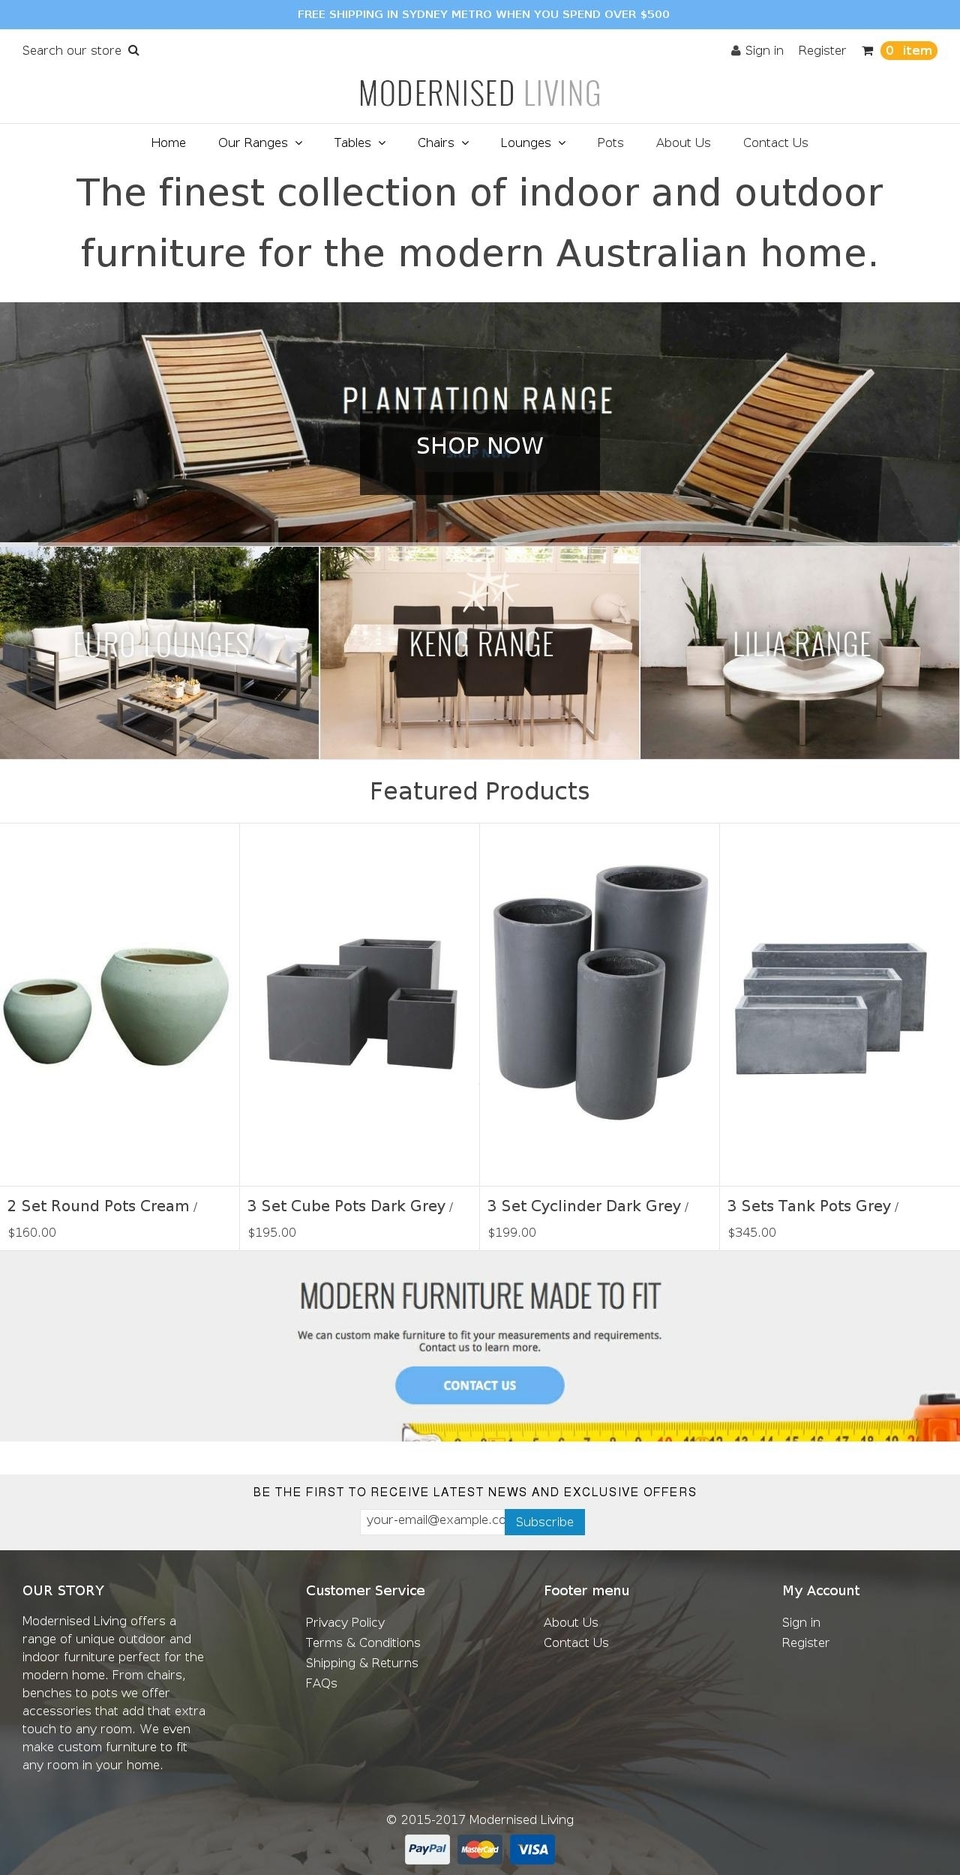 Weekend Shopify theme site example modernisedliving.com